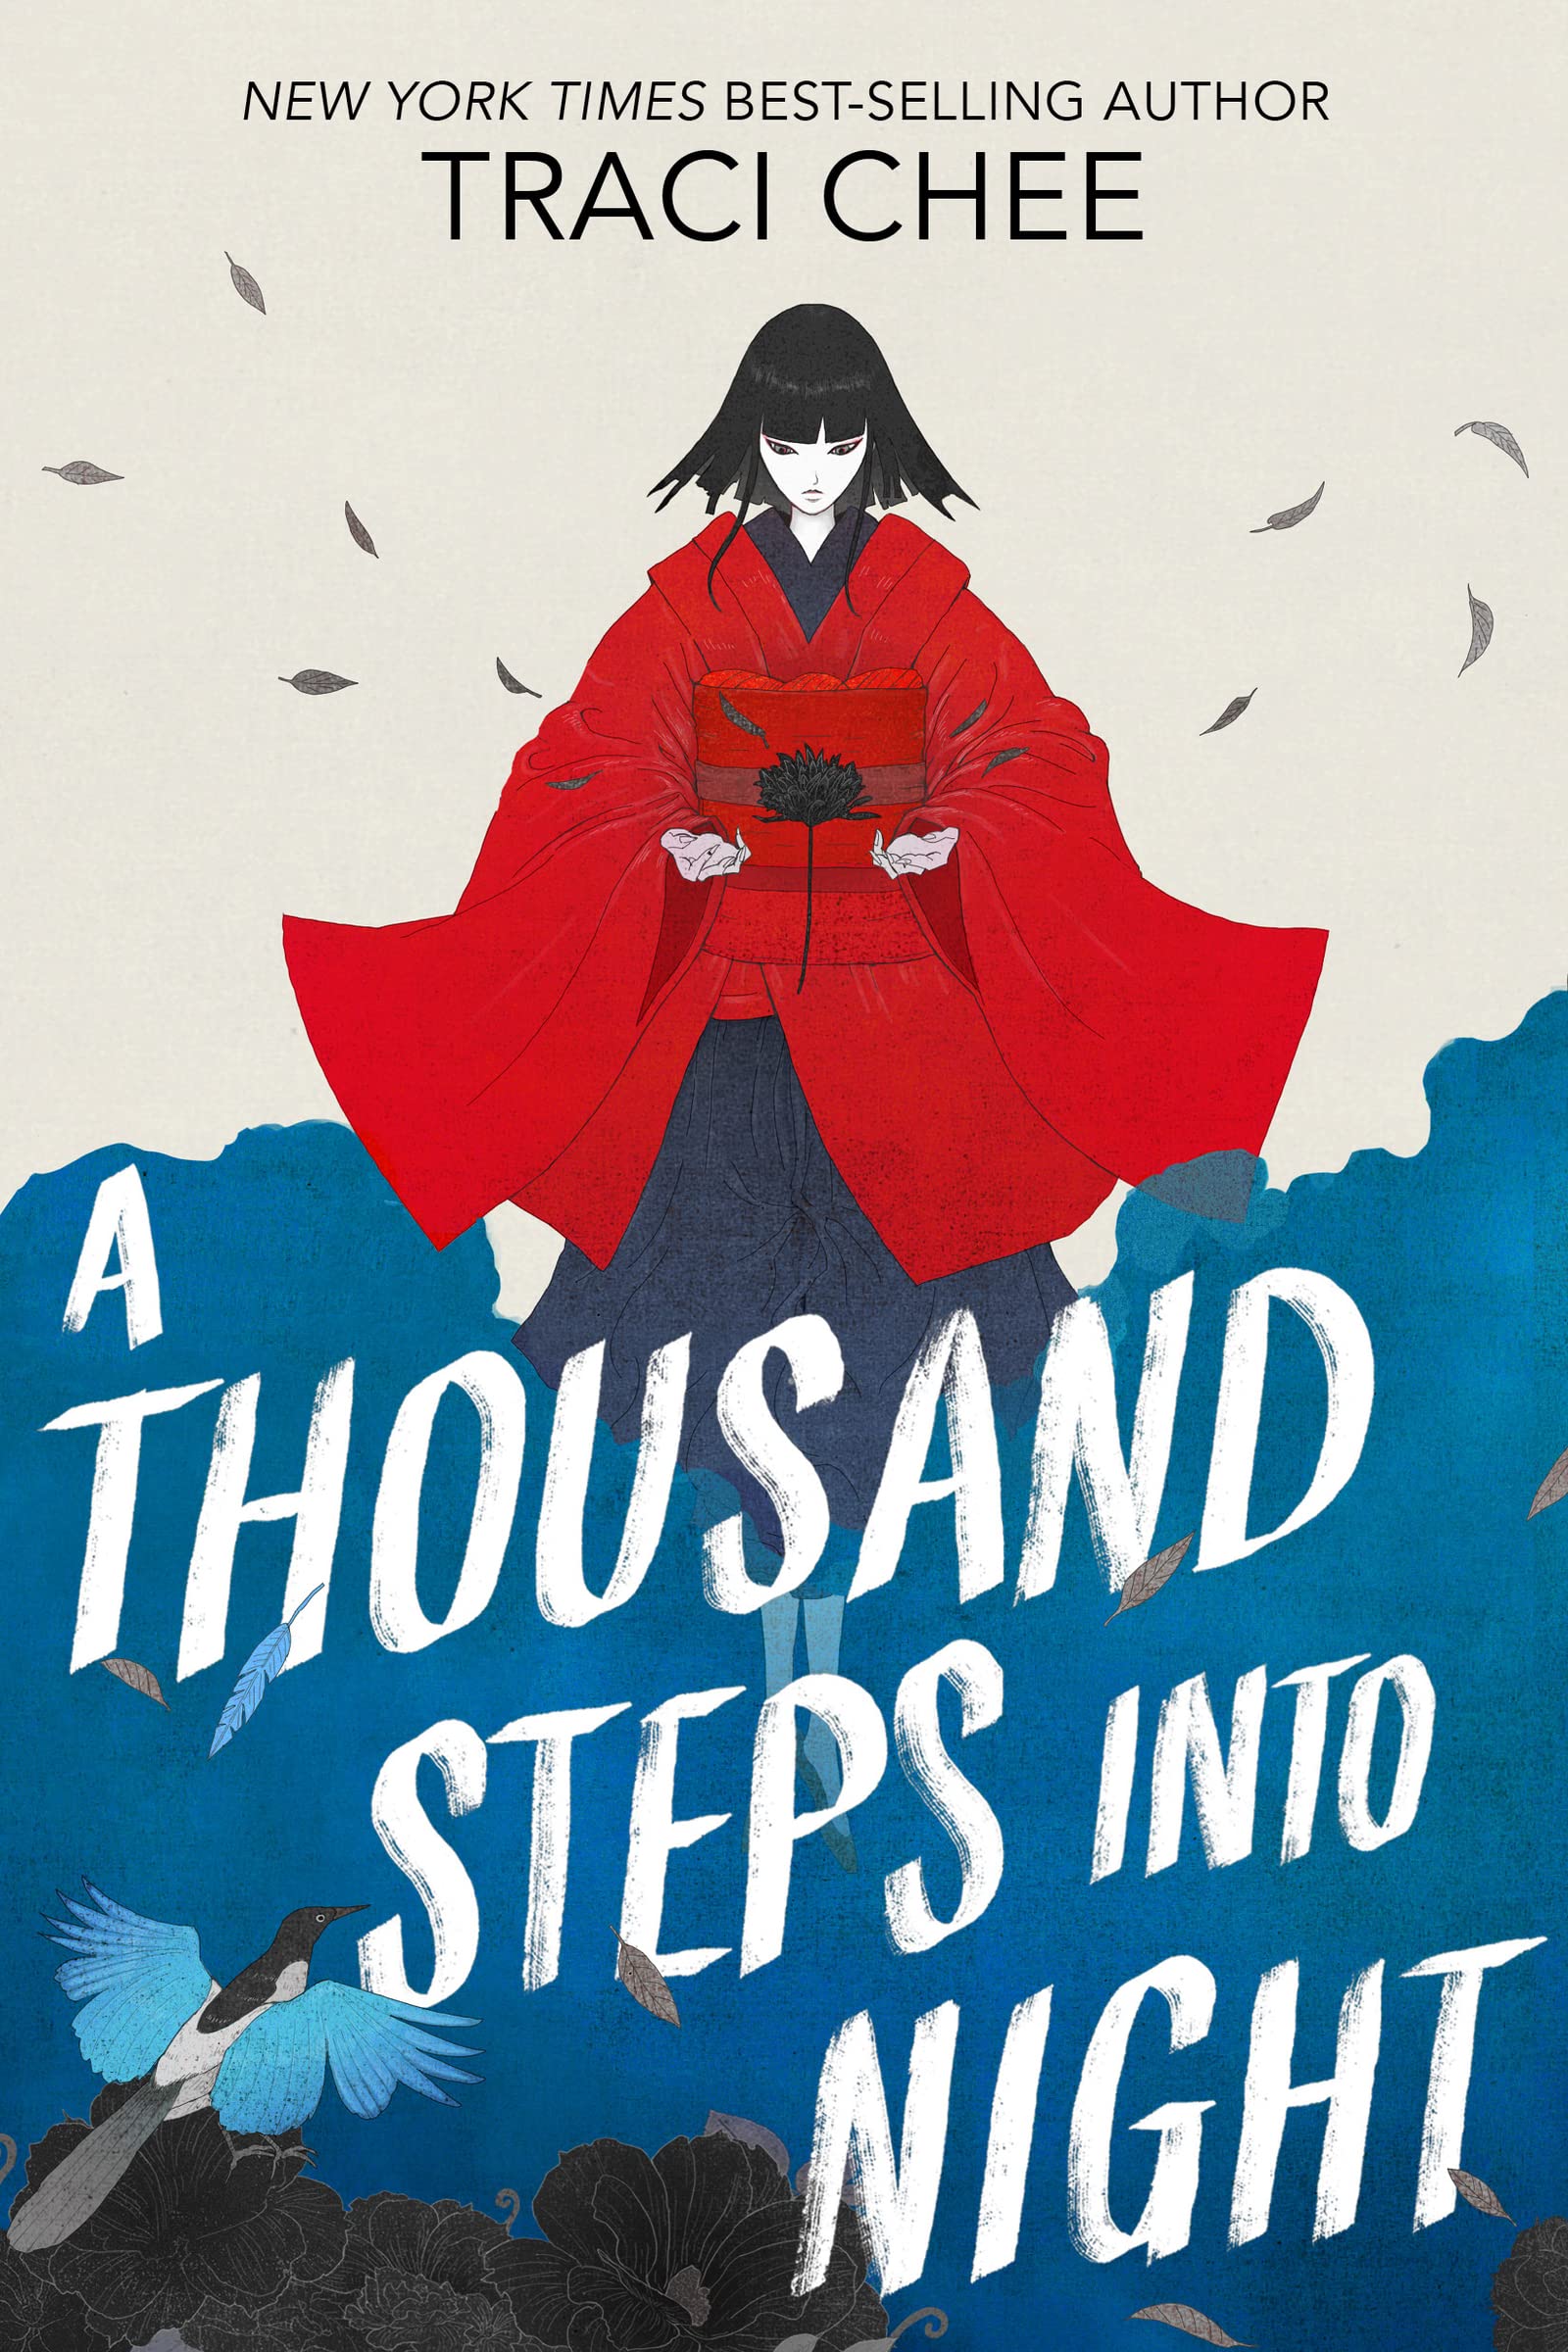 Cover of A Thousand Steps into Night, featuring a young woman in a red robe with feathers around her in front of a blue cloud